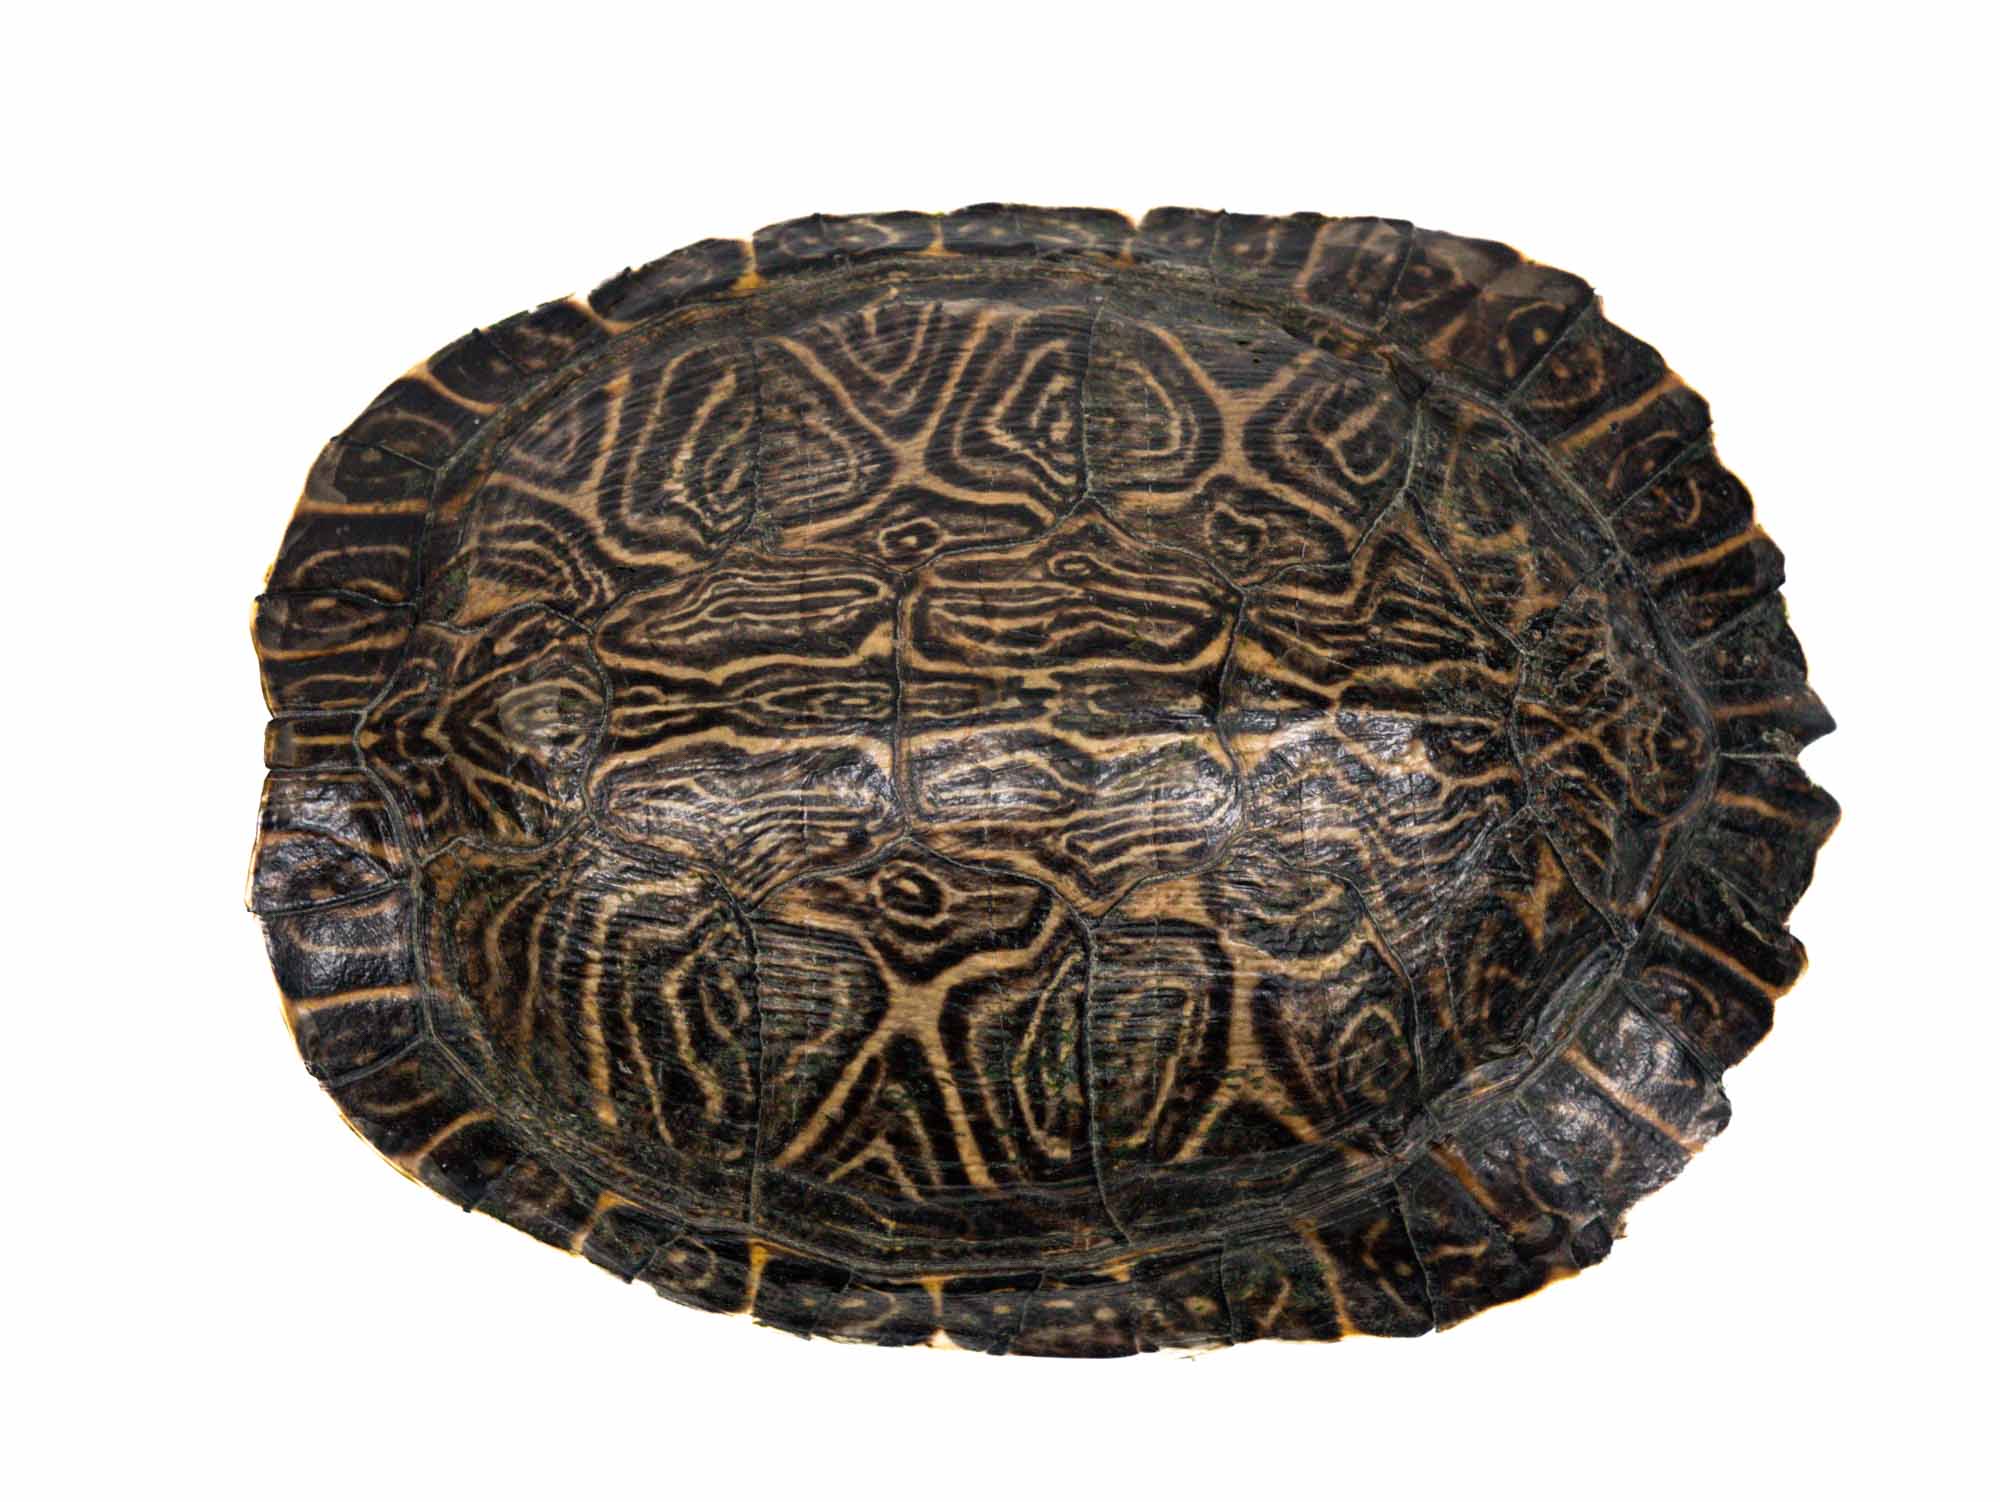 River Cooter Turtle Shell: 7 to 8